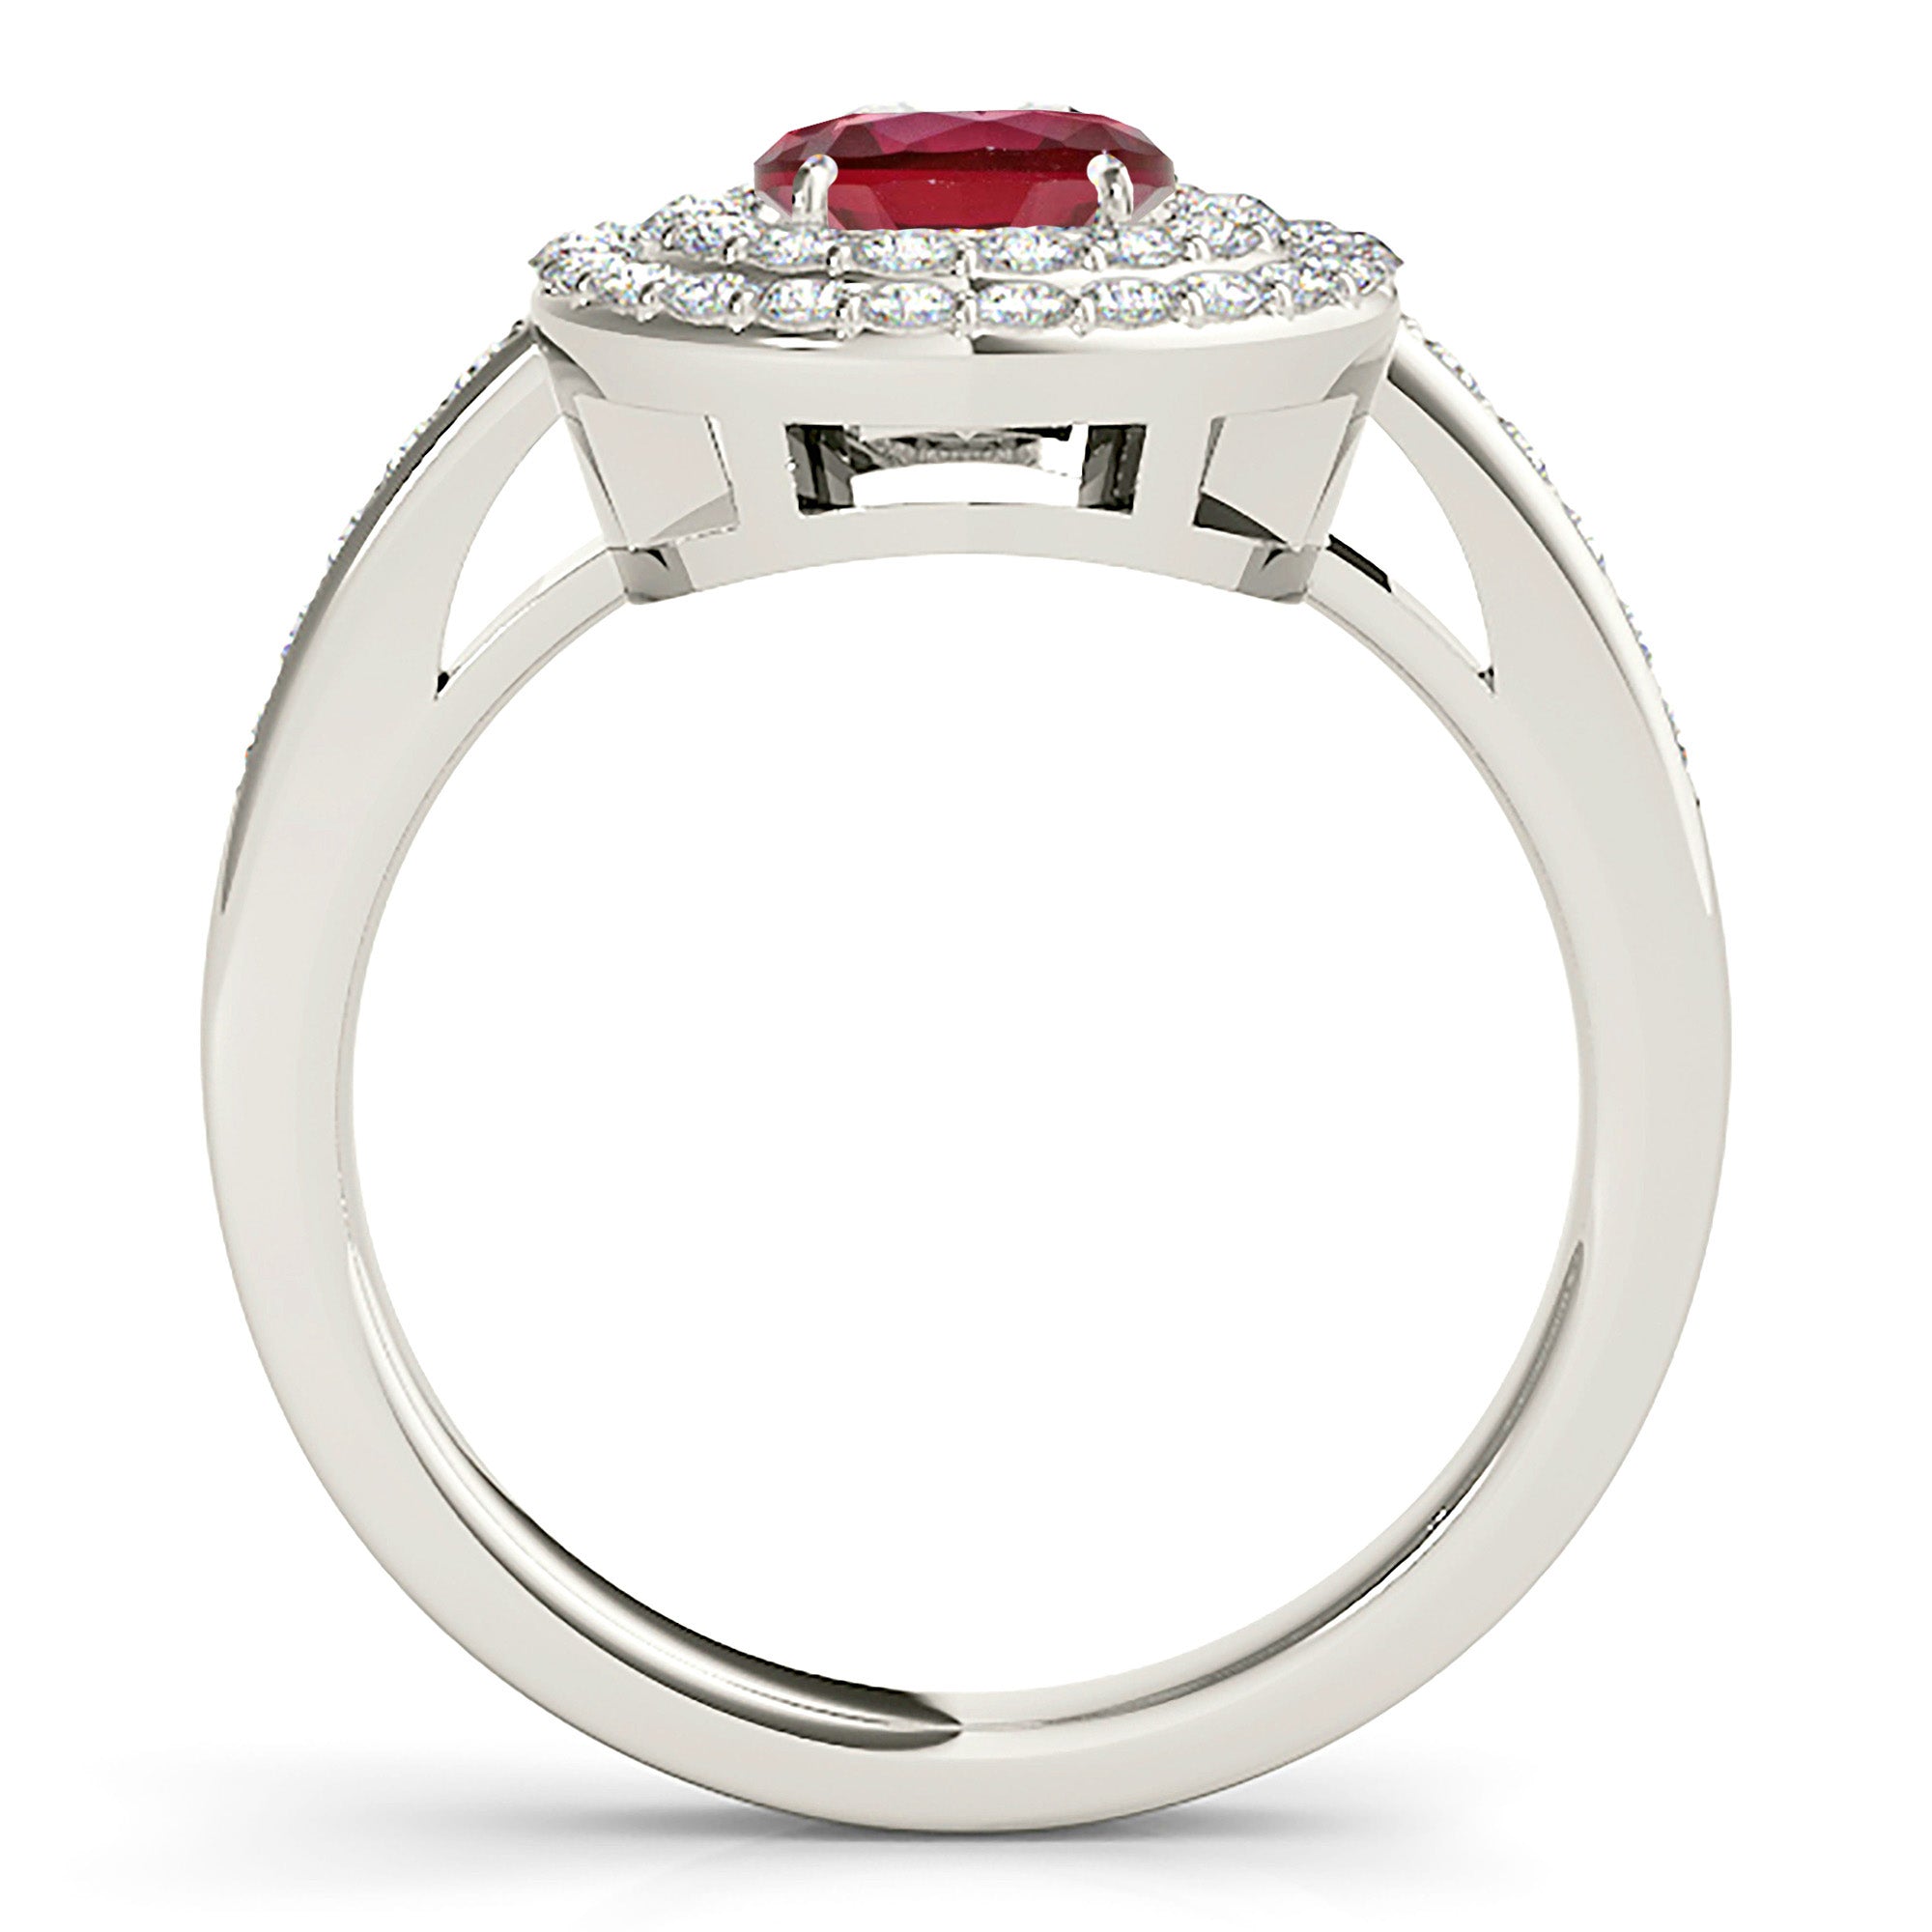 1.35 ct. Genuine Ruby Ring With 0.70 ctw. Diamond Double Row Halo And Delicate Diamond Band-in 14K/18K White, Yellow, Rose Gold and Platinum - Christmas Jewelry Gift -VIRABYANI